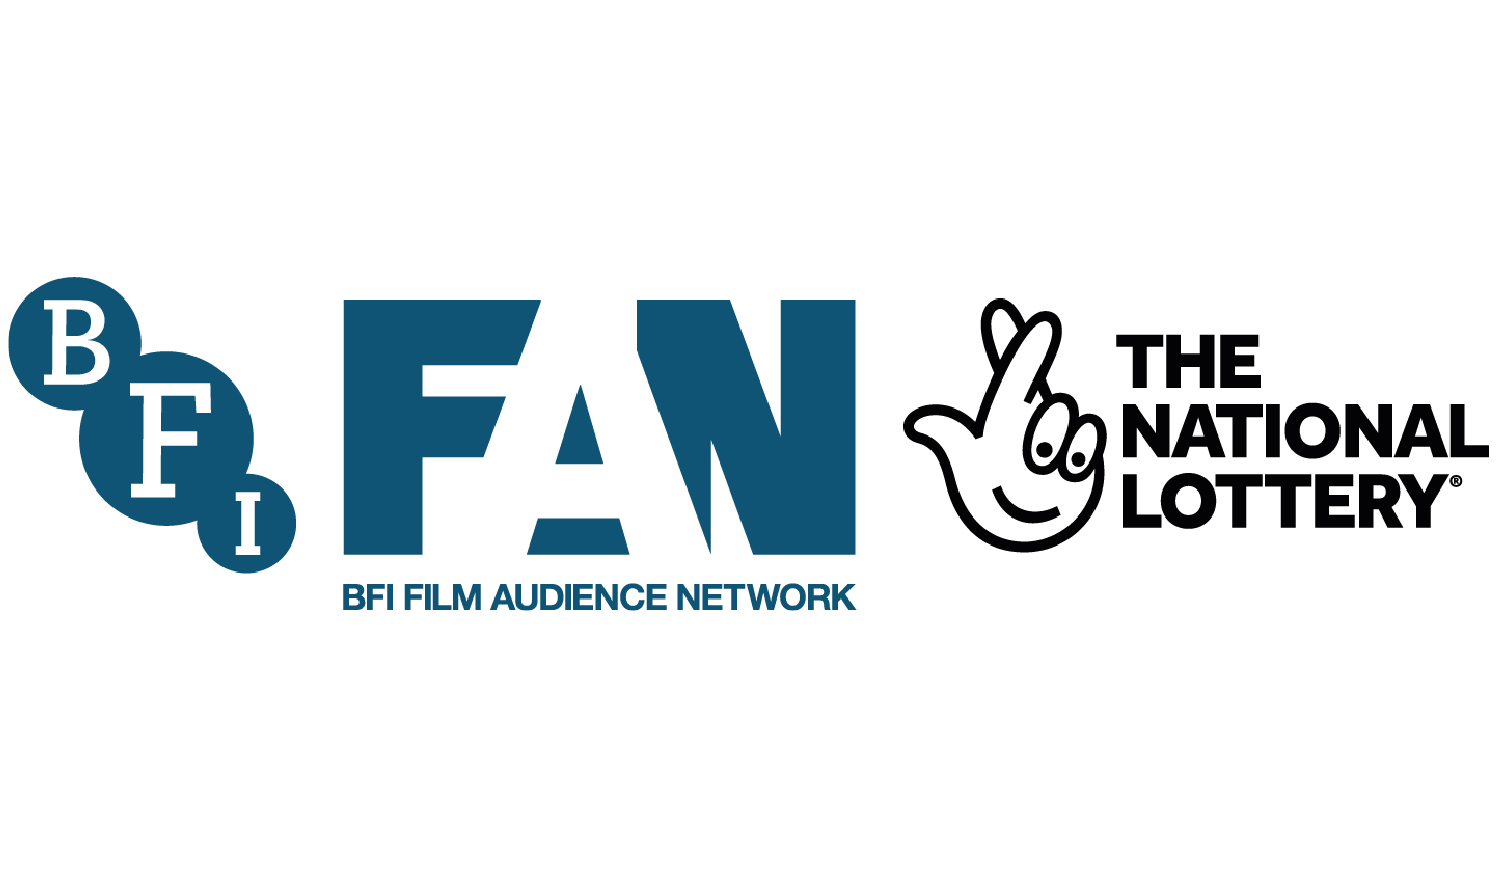 BFI Film Audience Network Logo and The National Lottery Logo